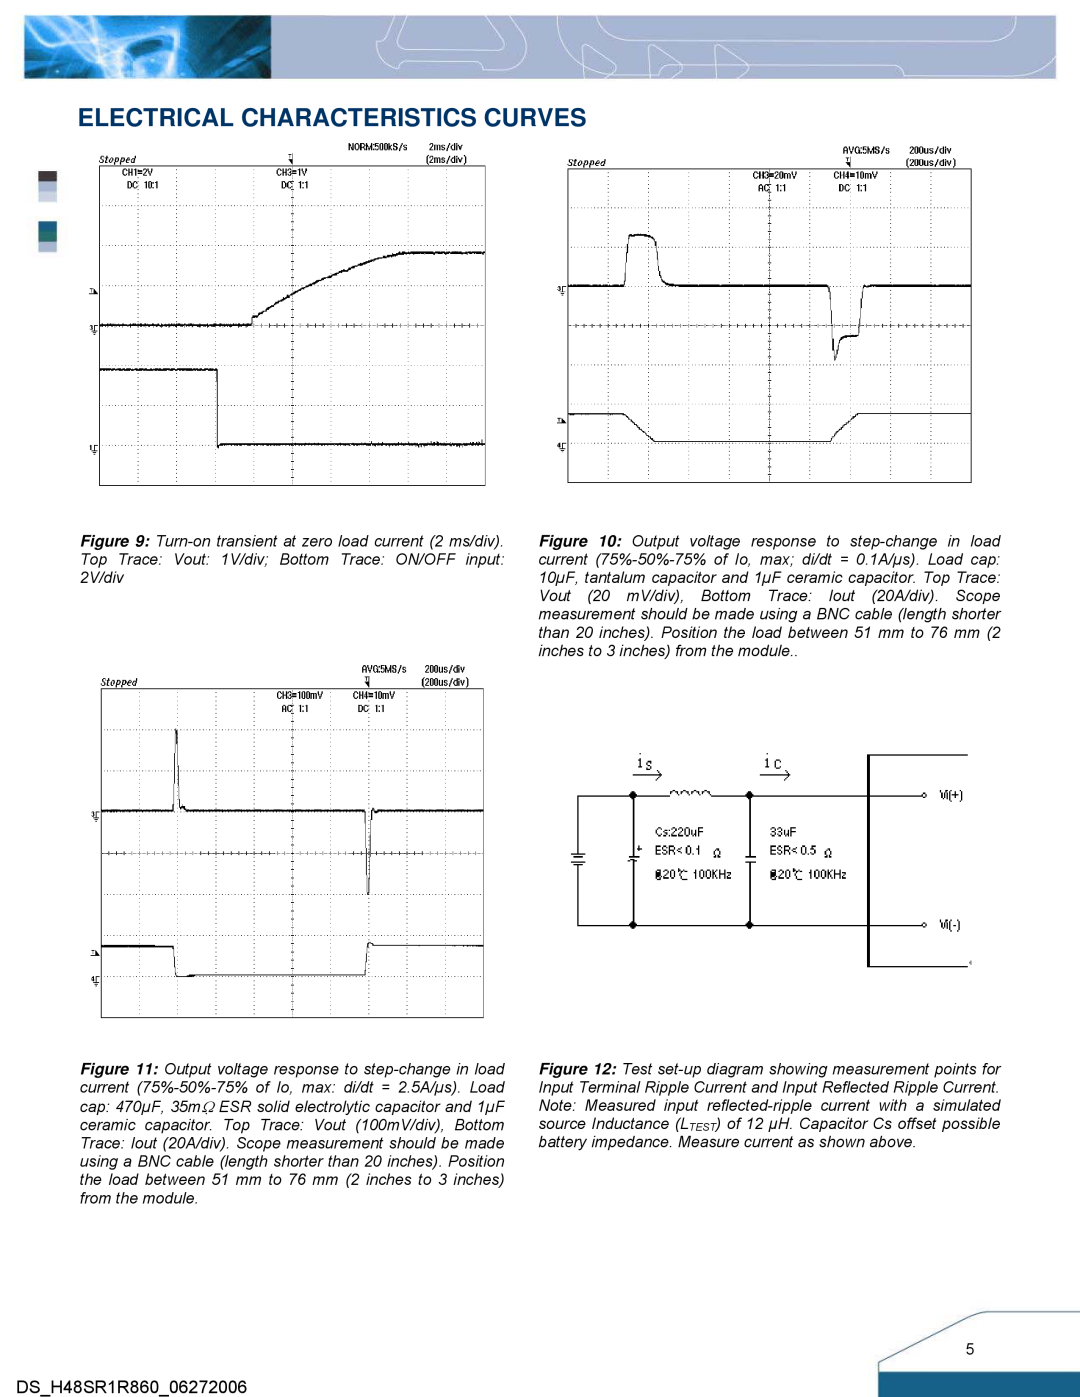 Delta Electronics Series H48SR manual Electrical Characteristics Curves, Turn-on transient at zero load current 2 ms/div 